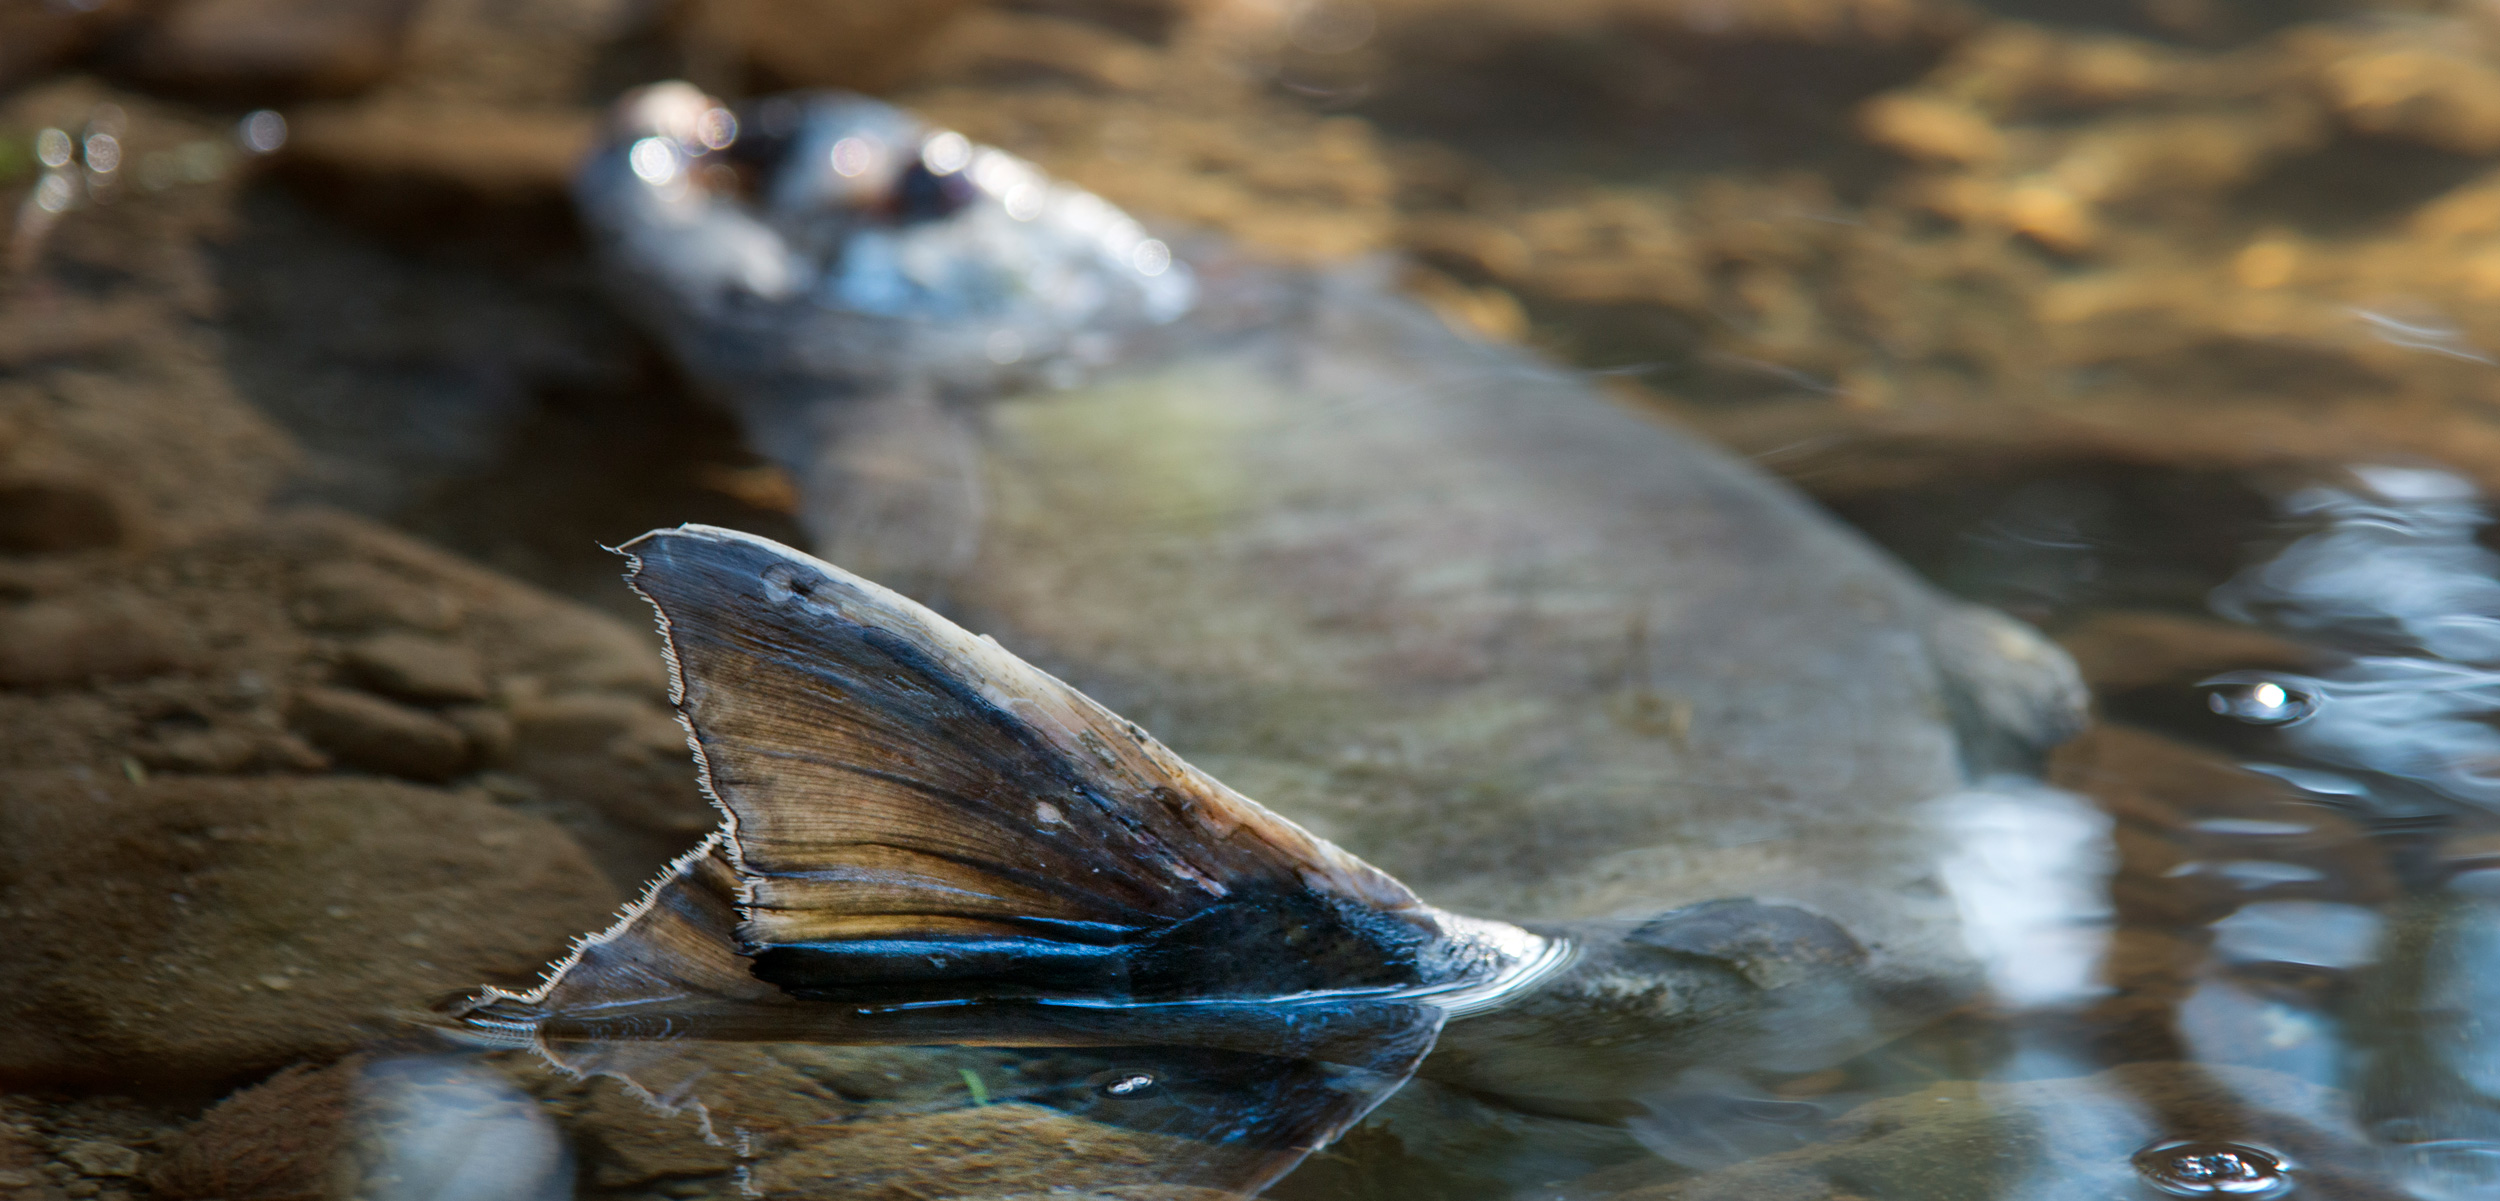 For those working to restore the salmon run in Douglas Creek, within Victoria, British Columbia, this dead fish represents hope for life. Photo by Shanna Baker